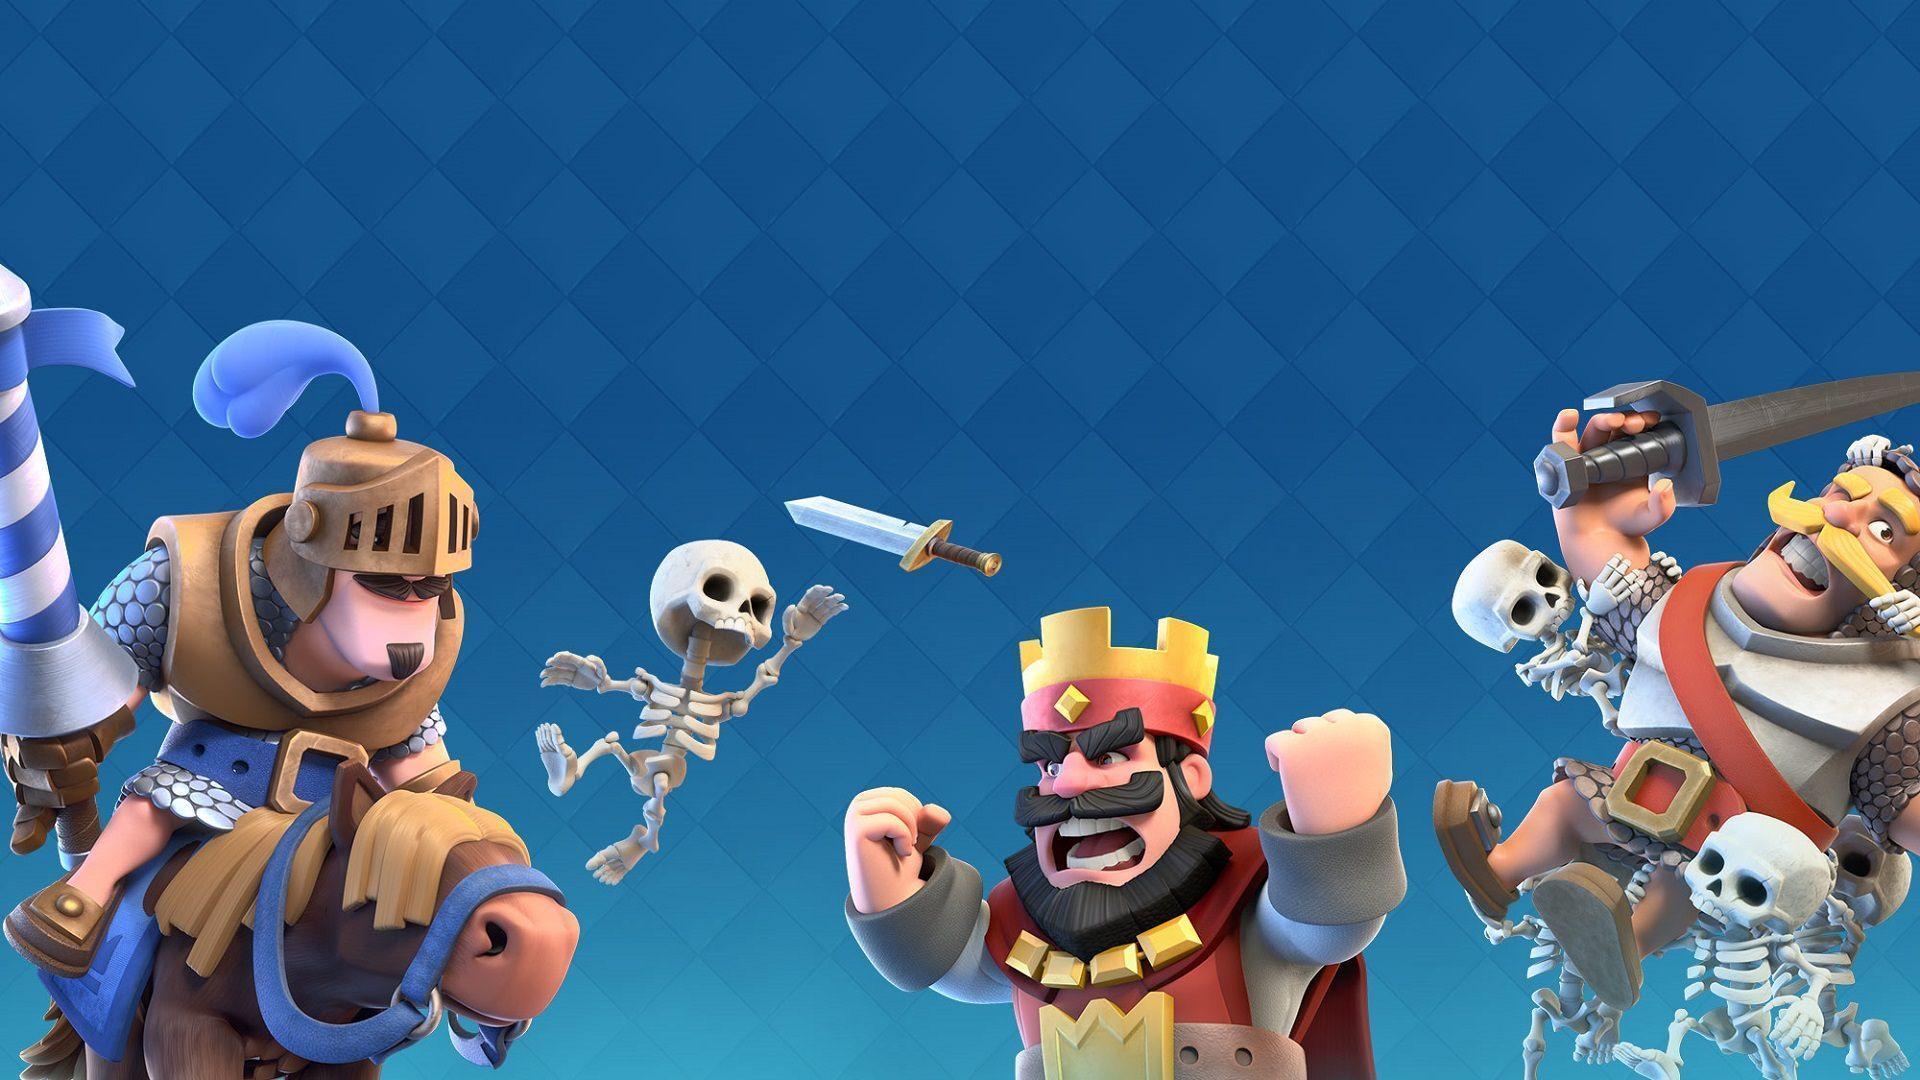 Clash Royale Free 4K Wallpapers, Clash Royale, Game